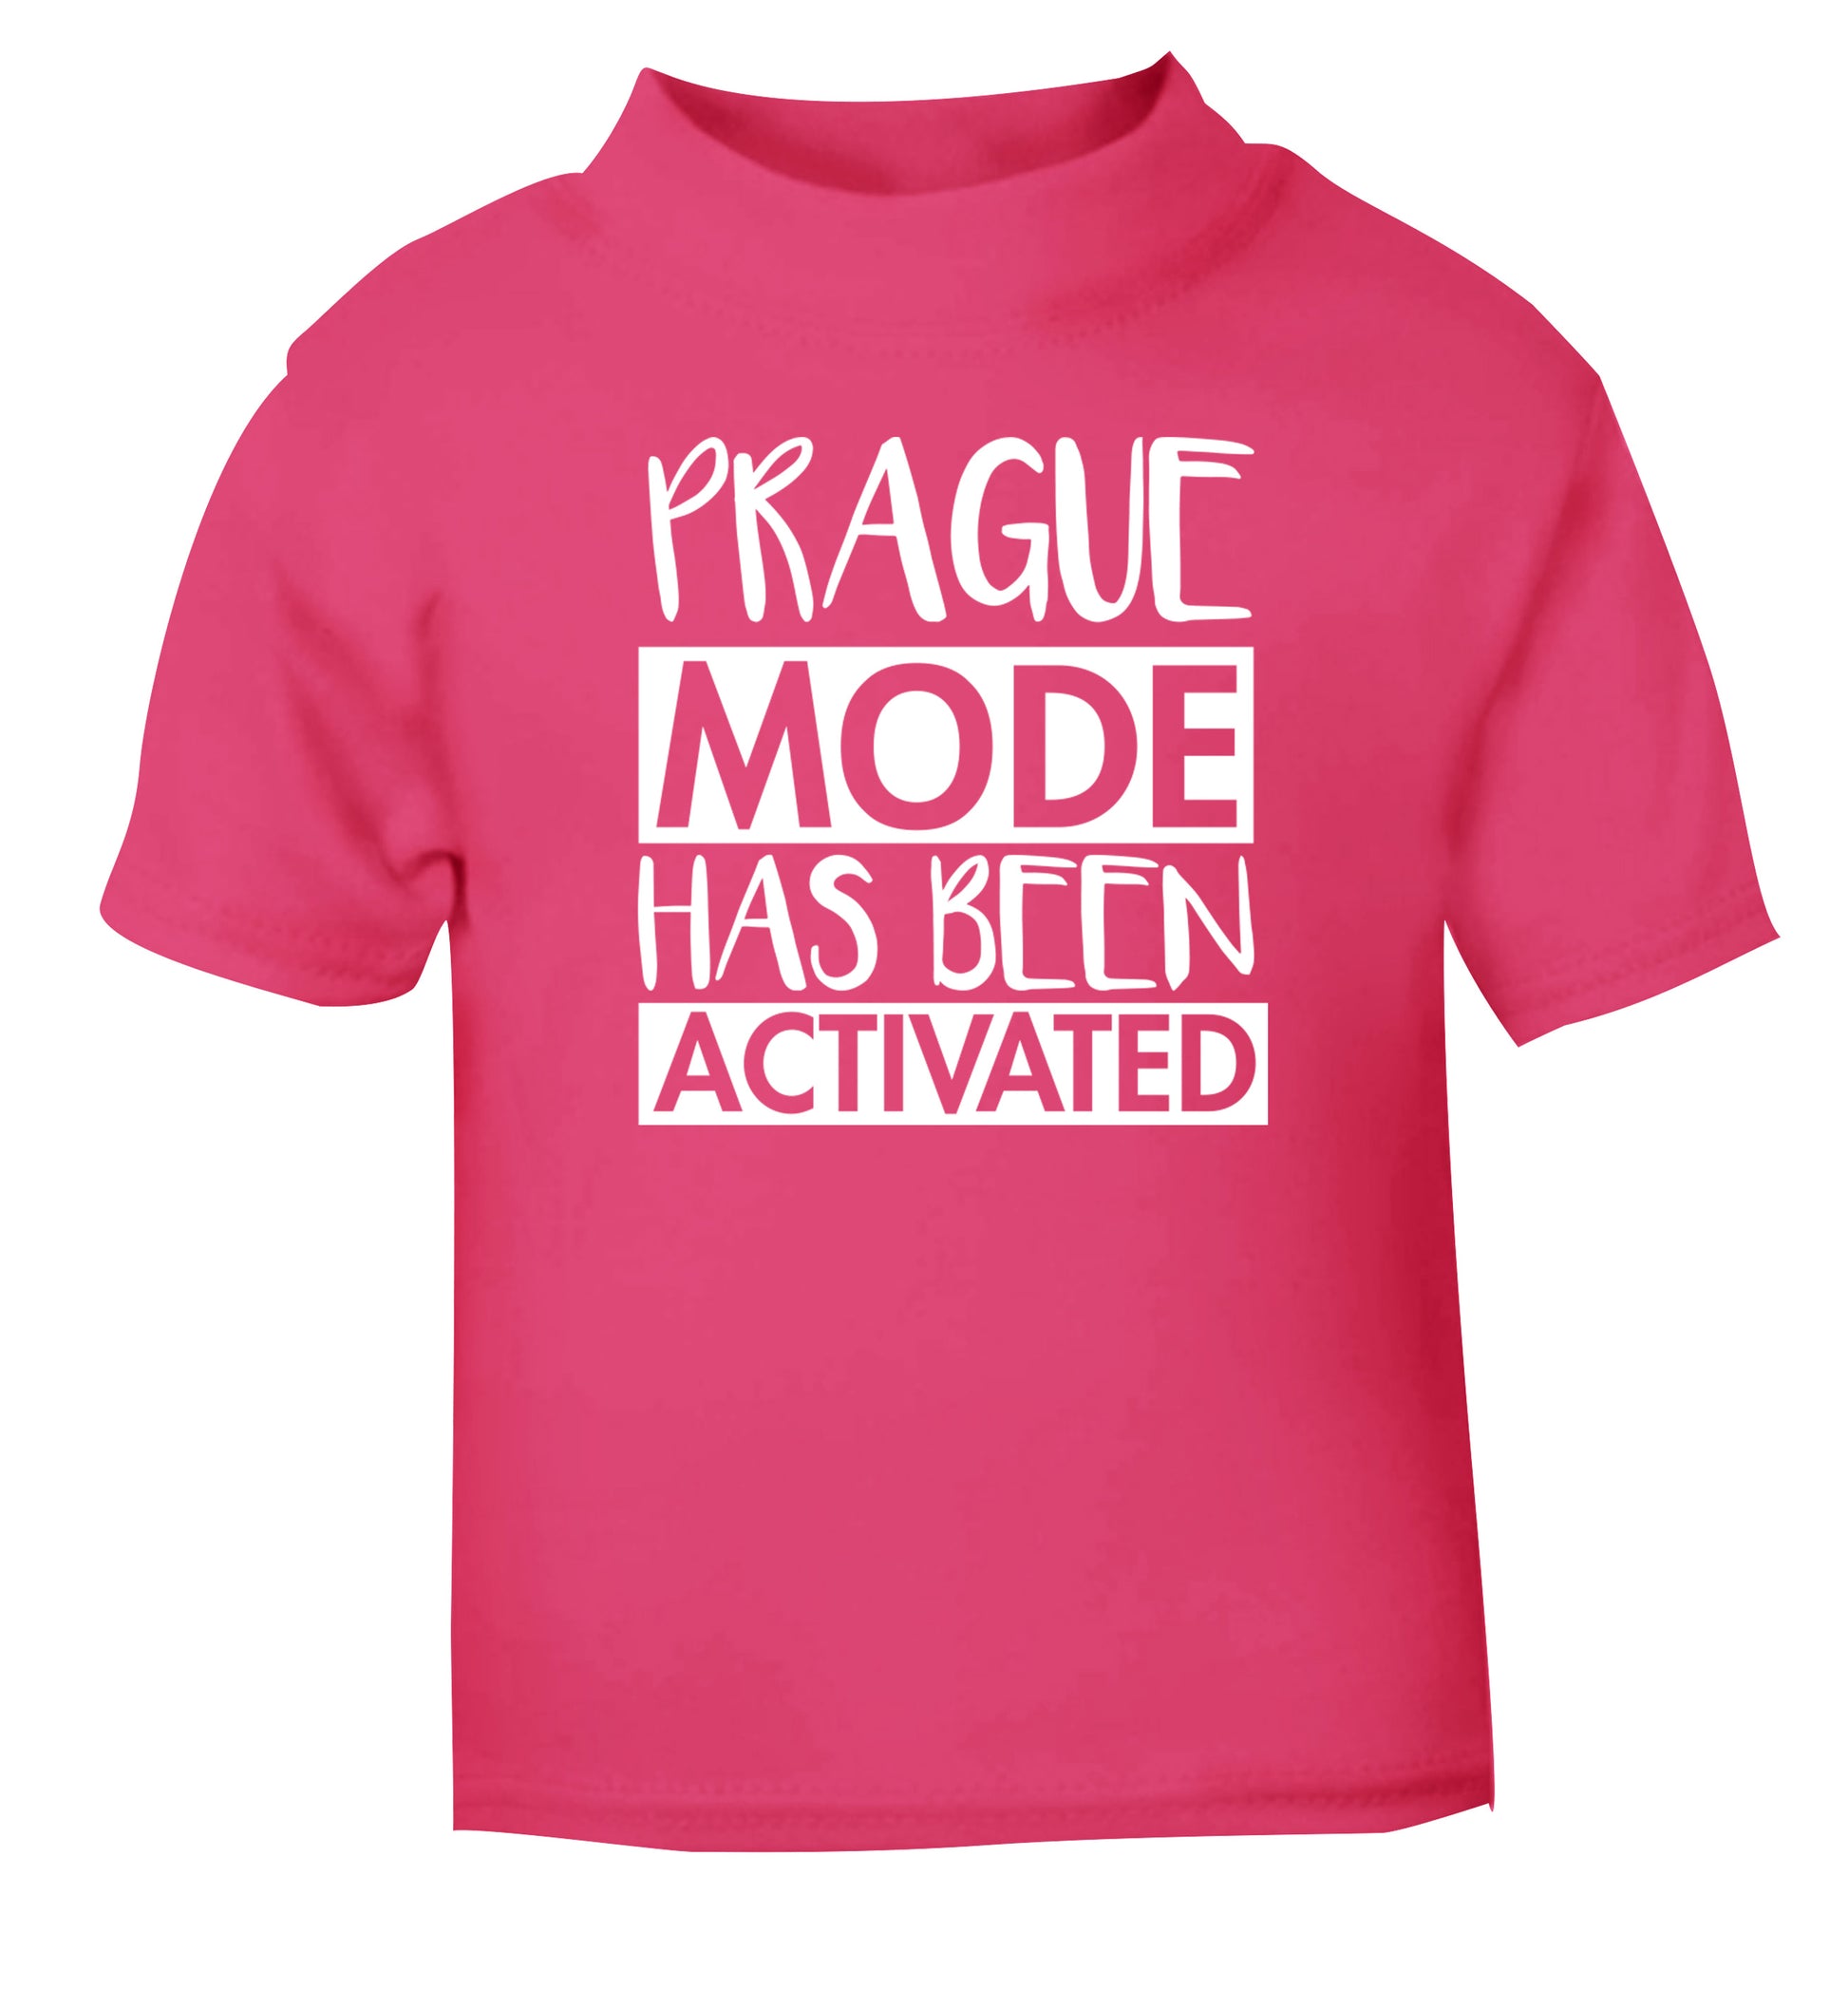 Prague mode has been activated pink Baby Toddler Tshirt 2 Years